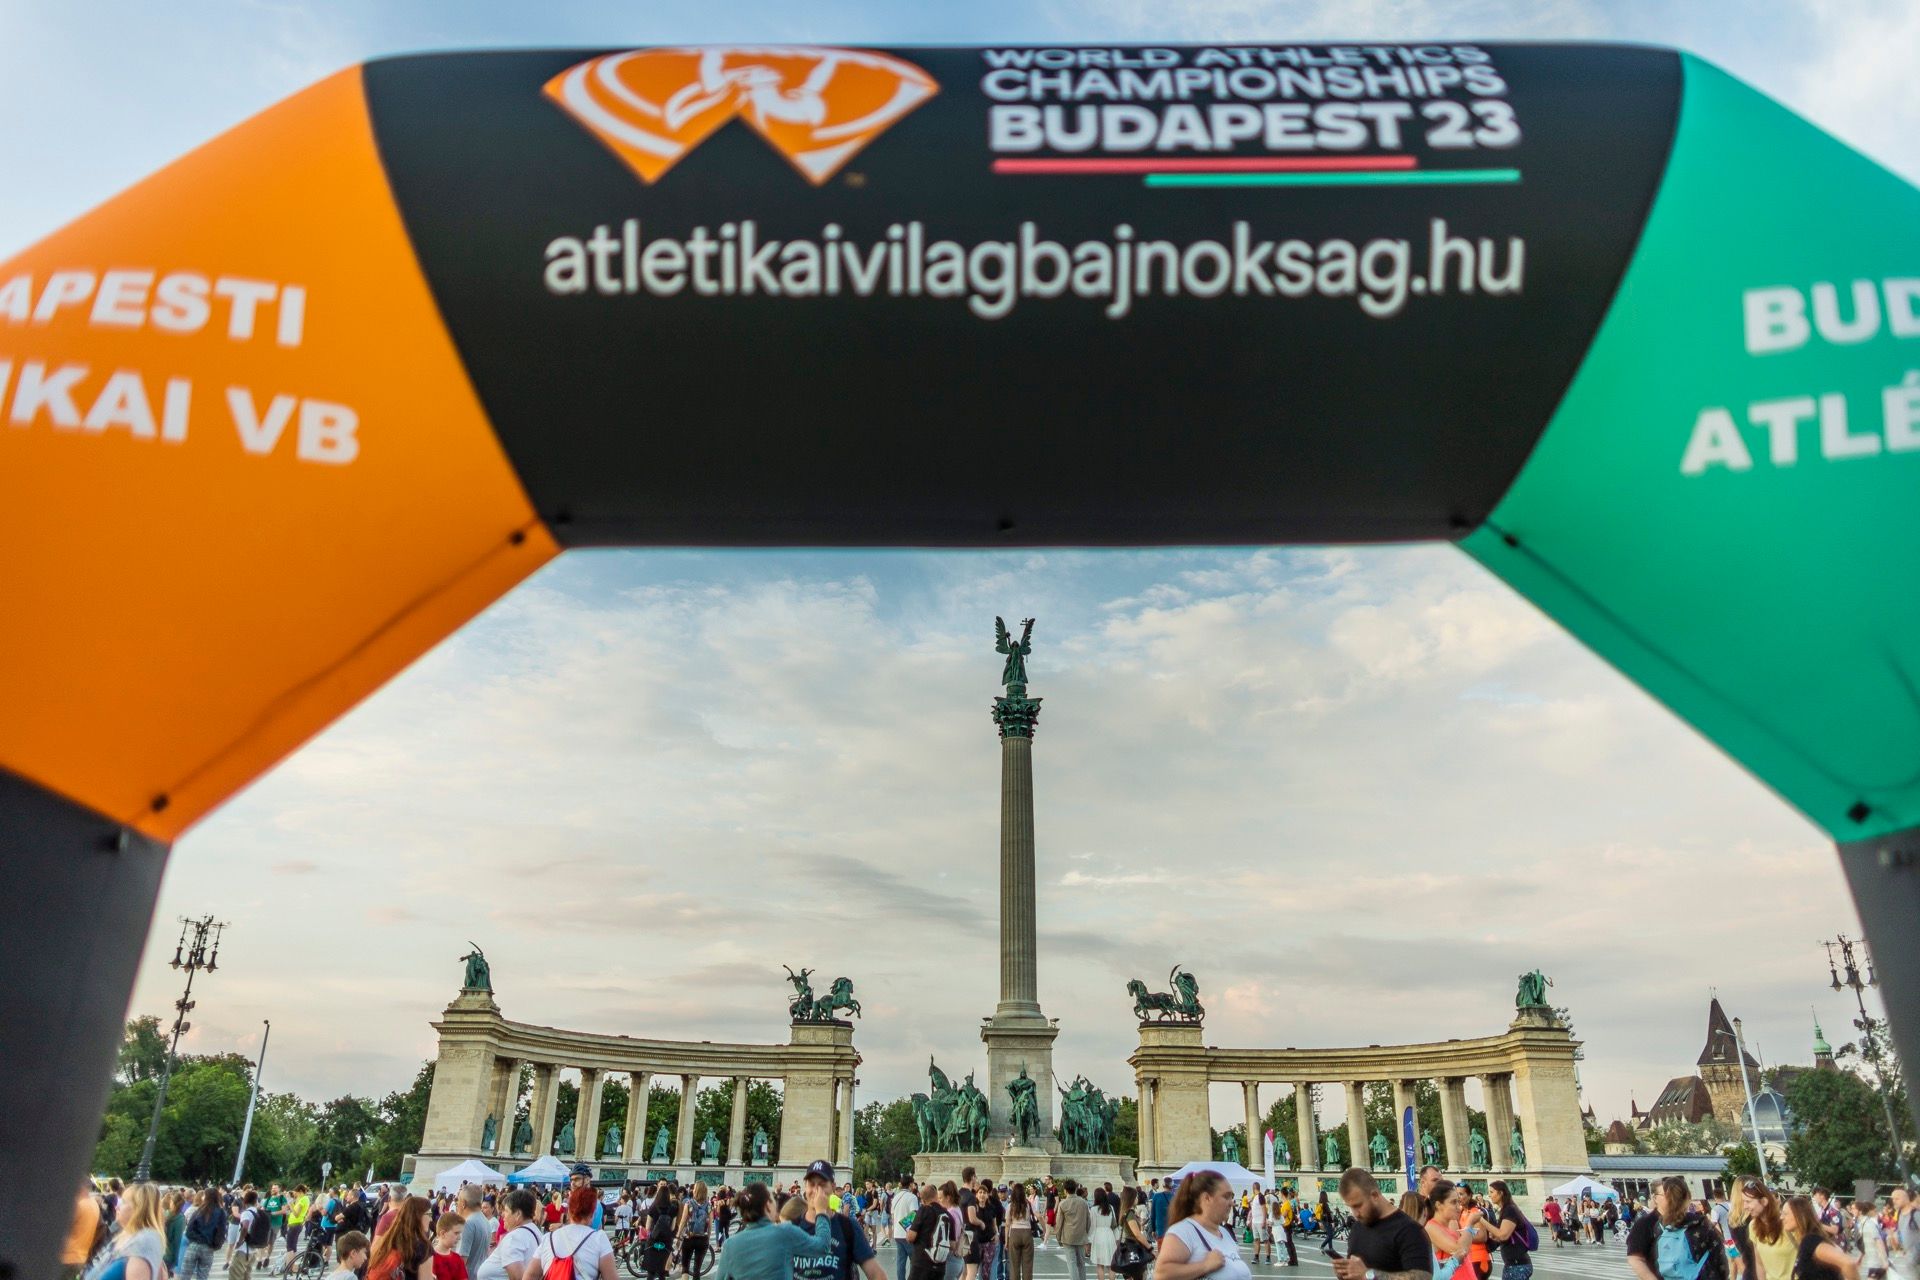 The World Athletics Championships Budapest 2023 at the Heroes' Square